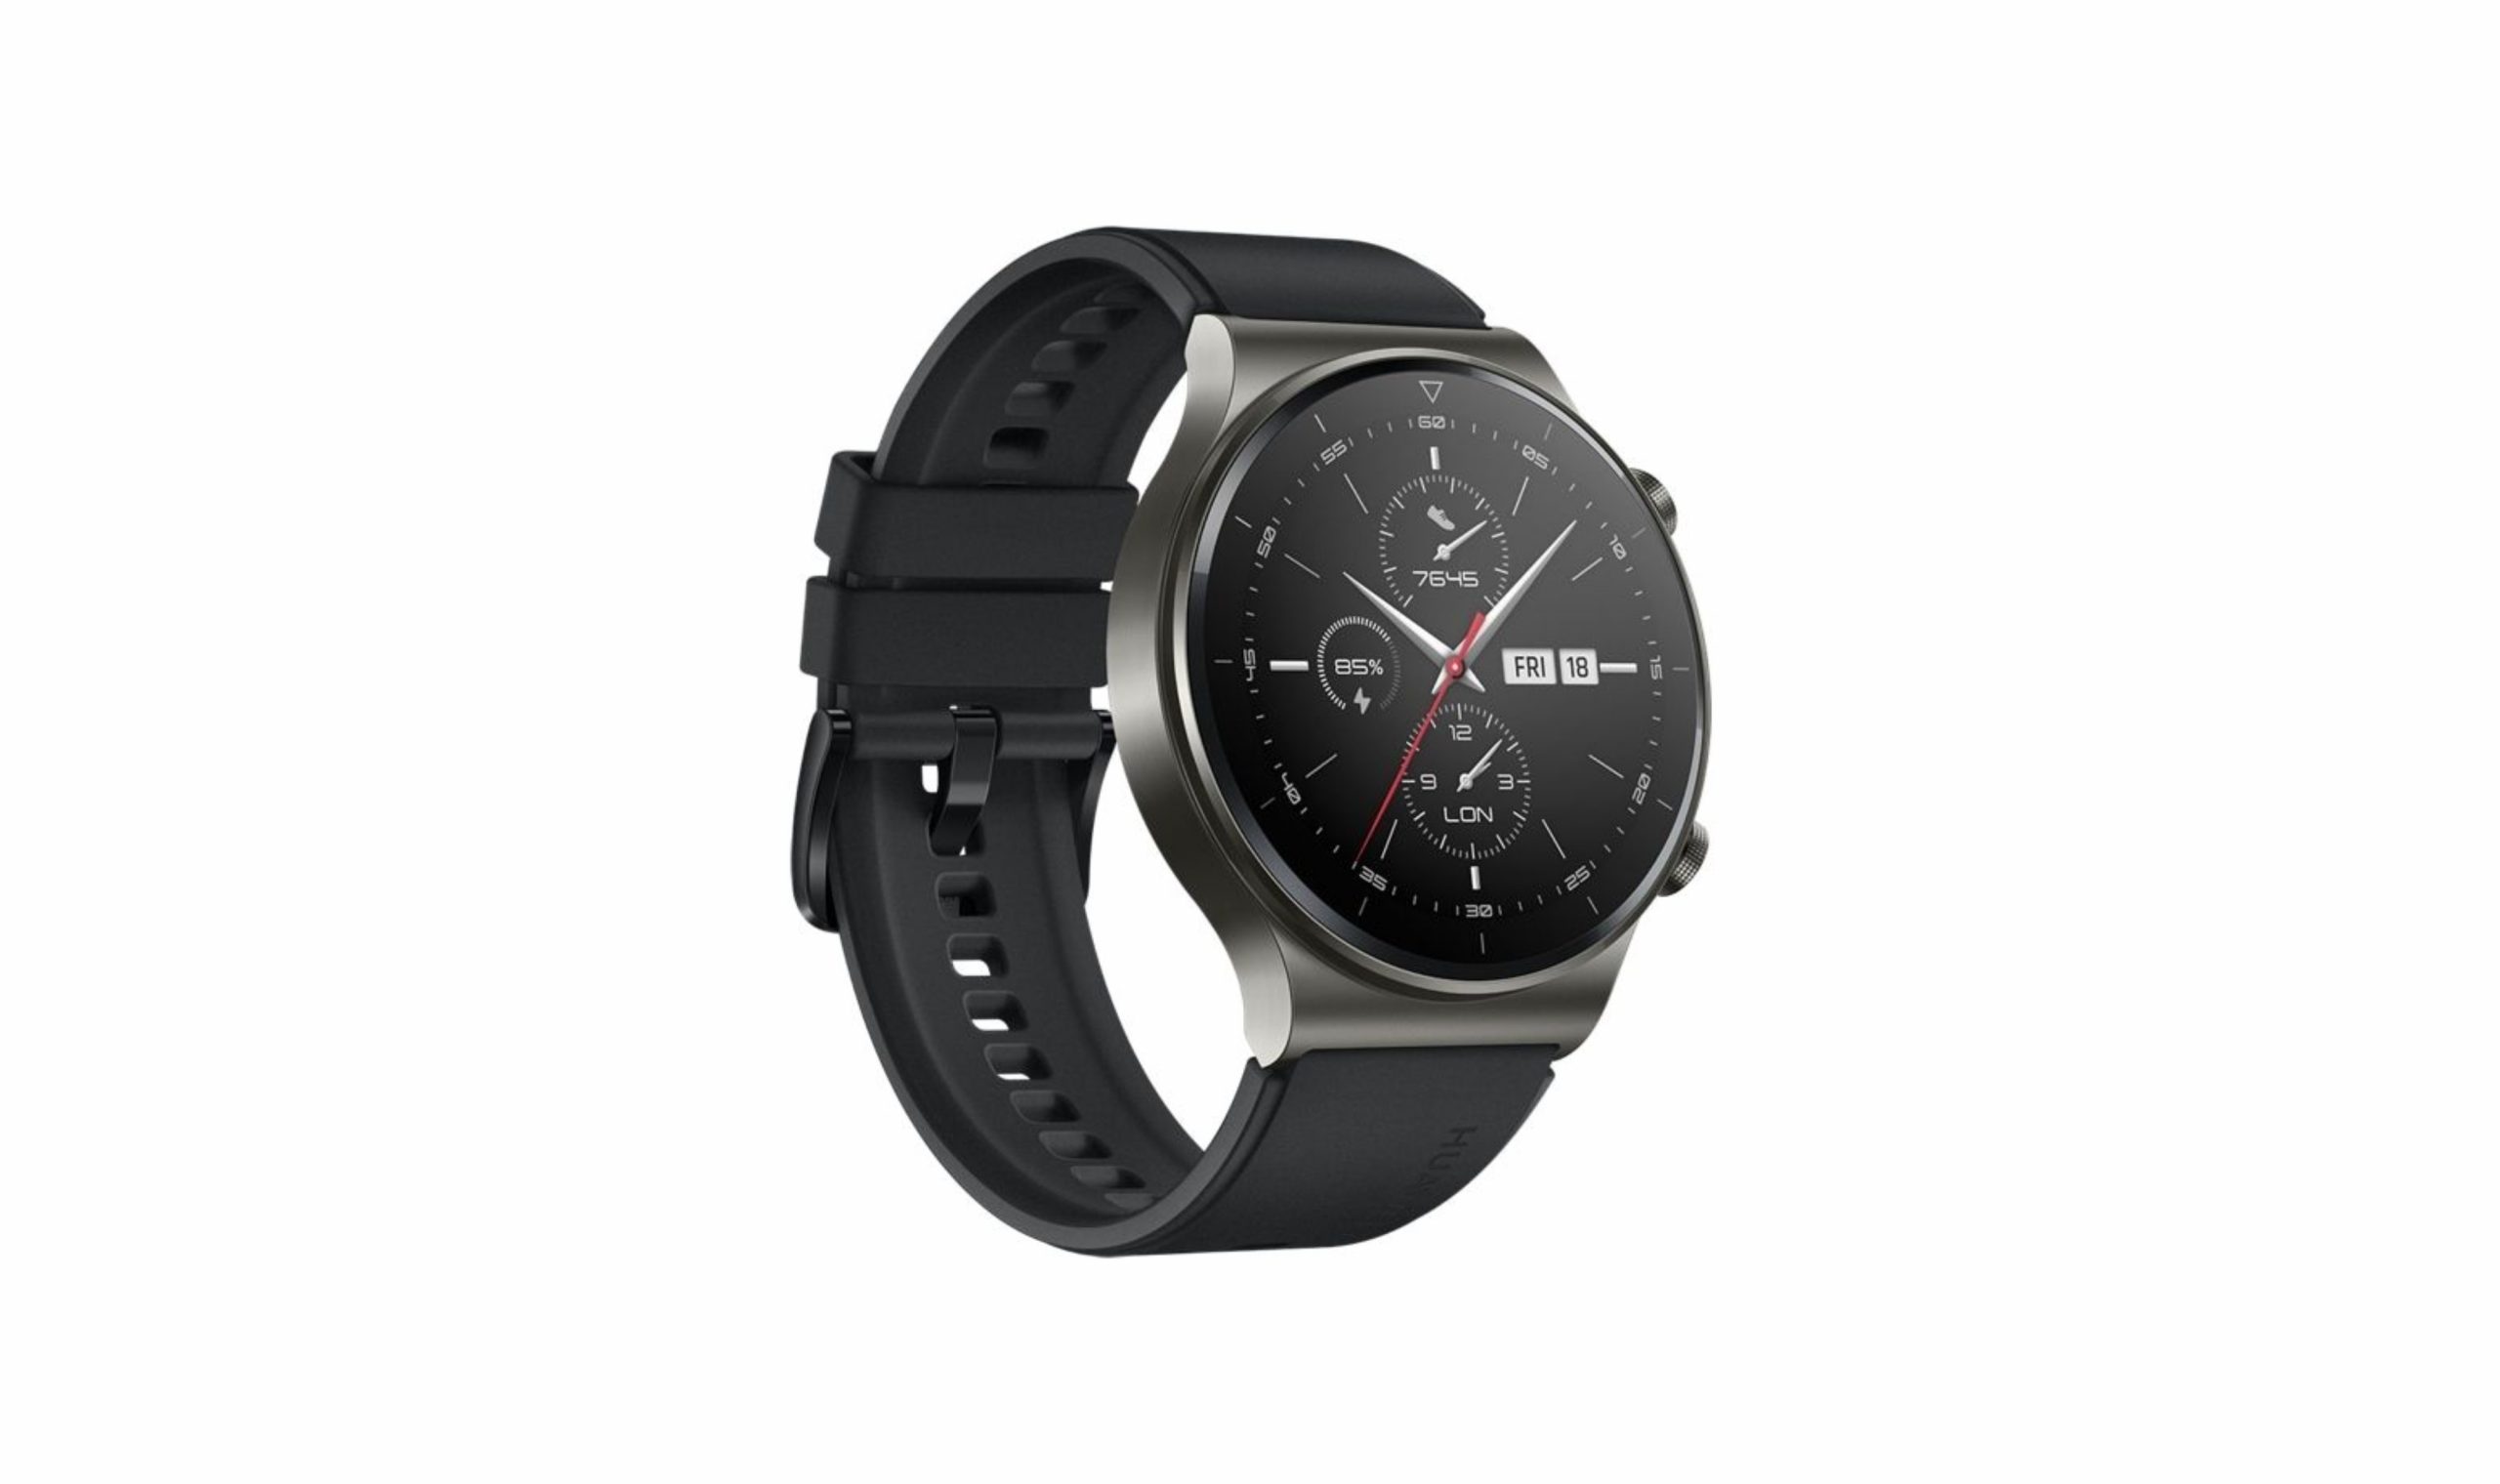 HUAWEI Watch GT 2 Pro, FreeBuds Pro & MateBook 14 2020 AMD are on sale in the UK with exciting freebies